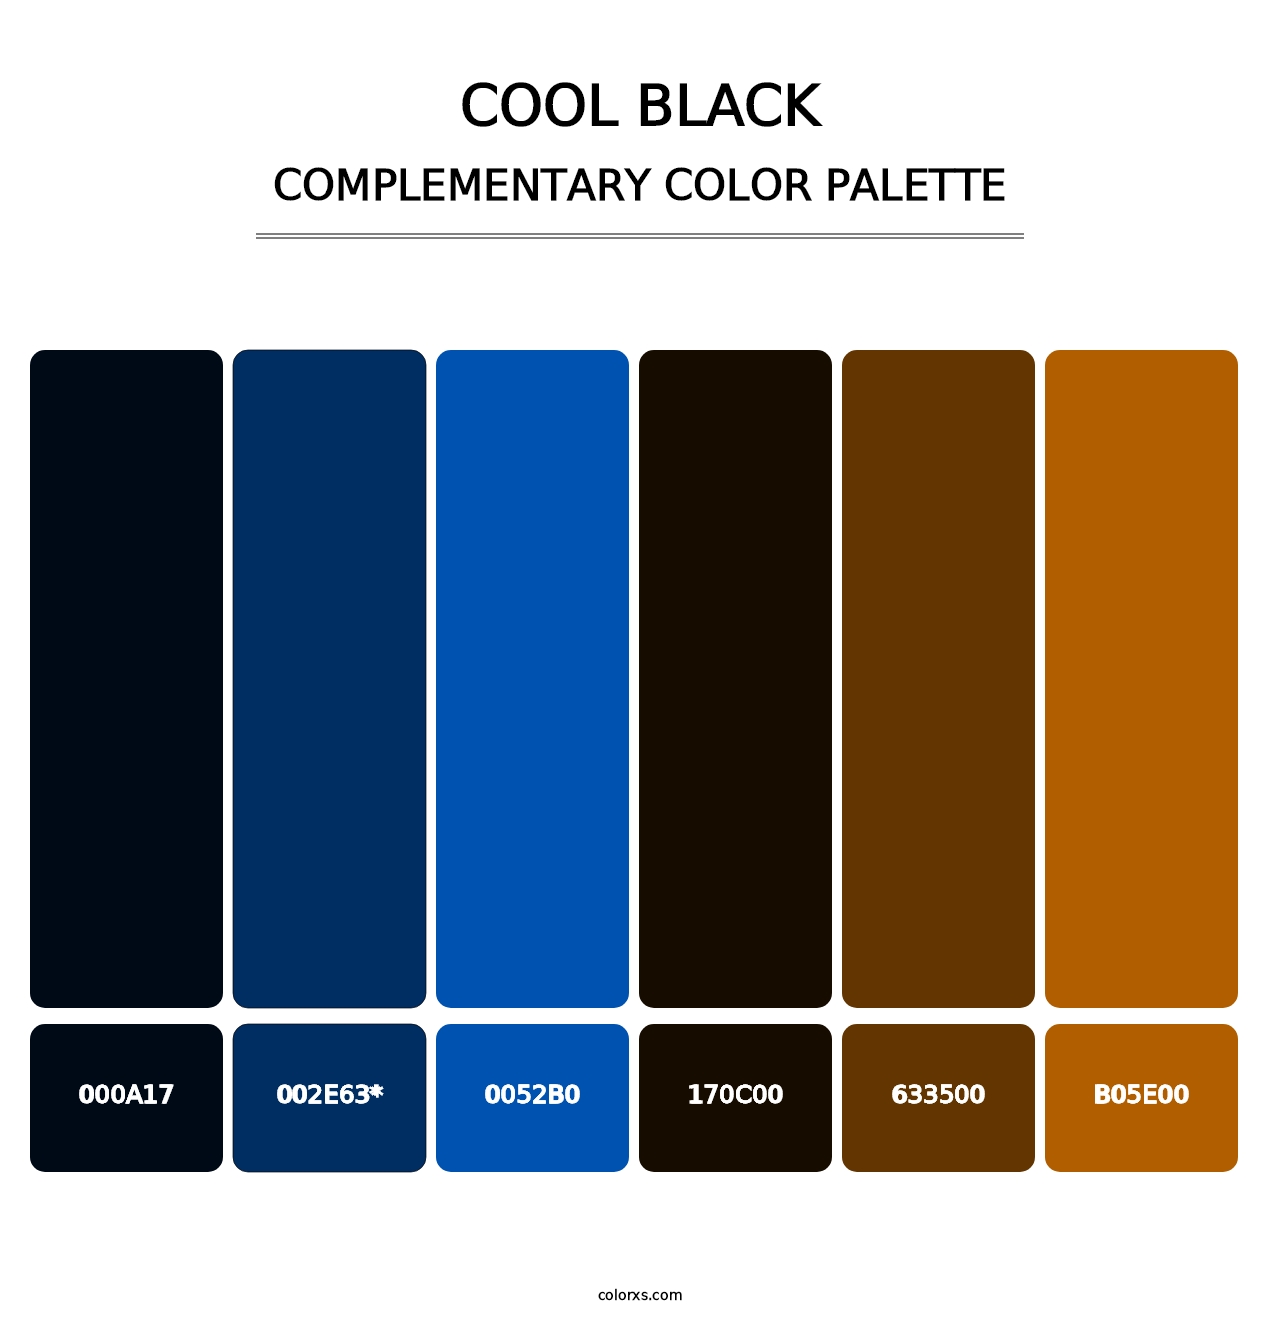 Cool Black - Complementary Color Palette